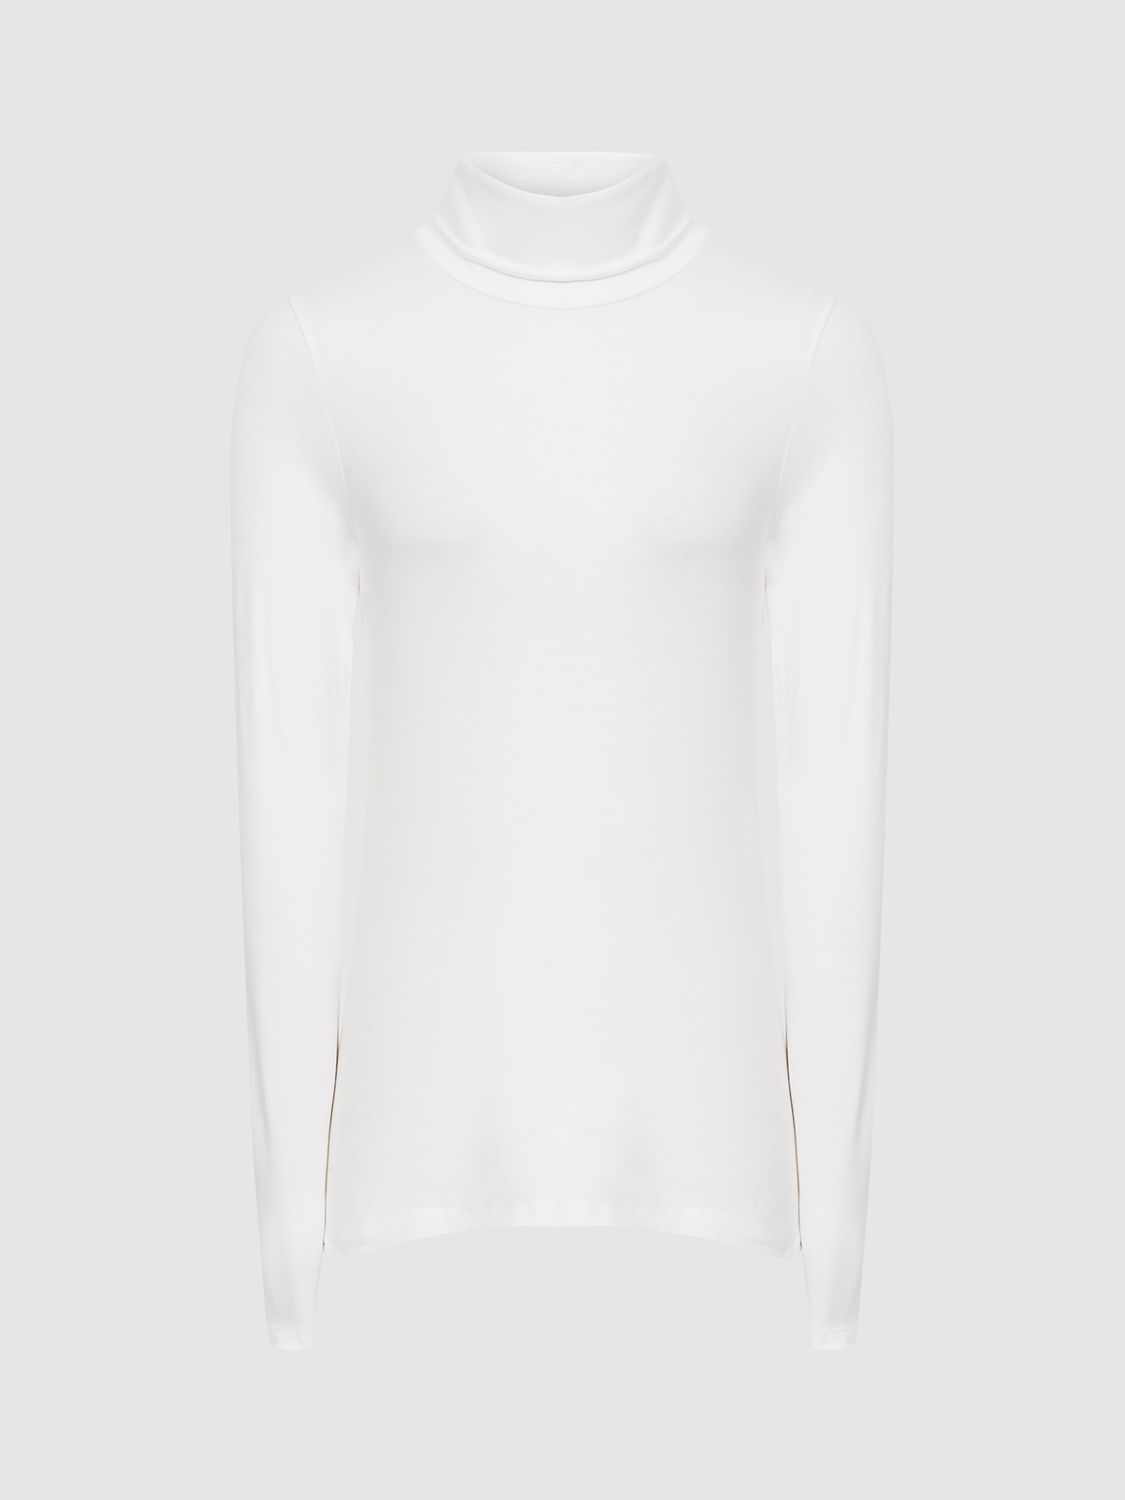 Reiss Phoebe Roll Neck Jersey Top, White at John Lewis & Partners